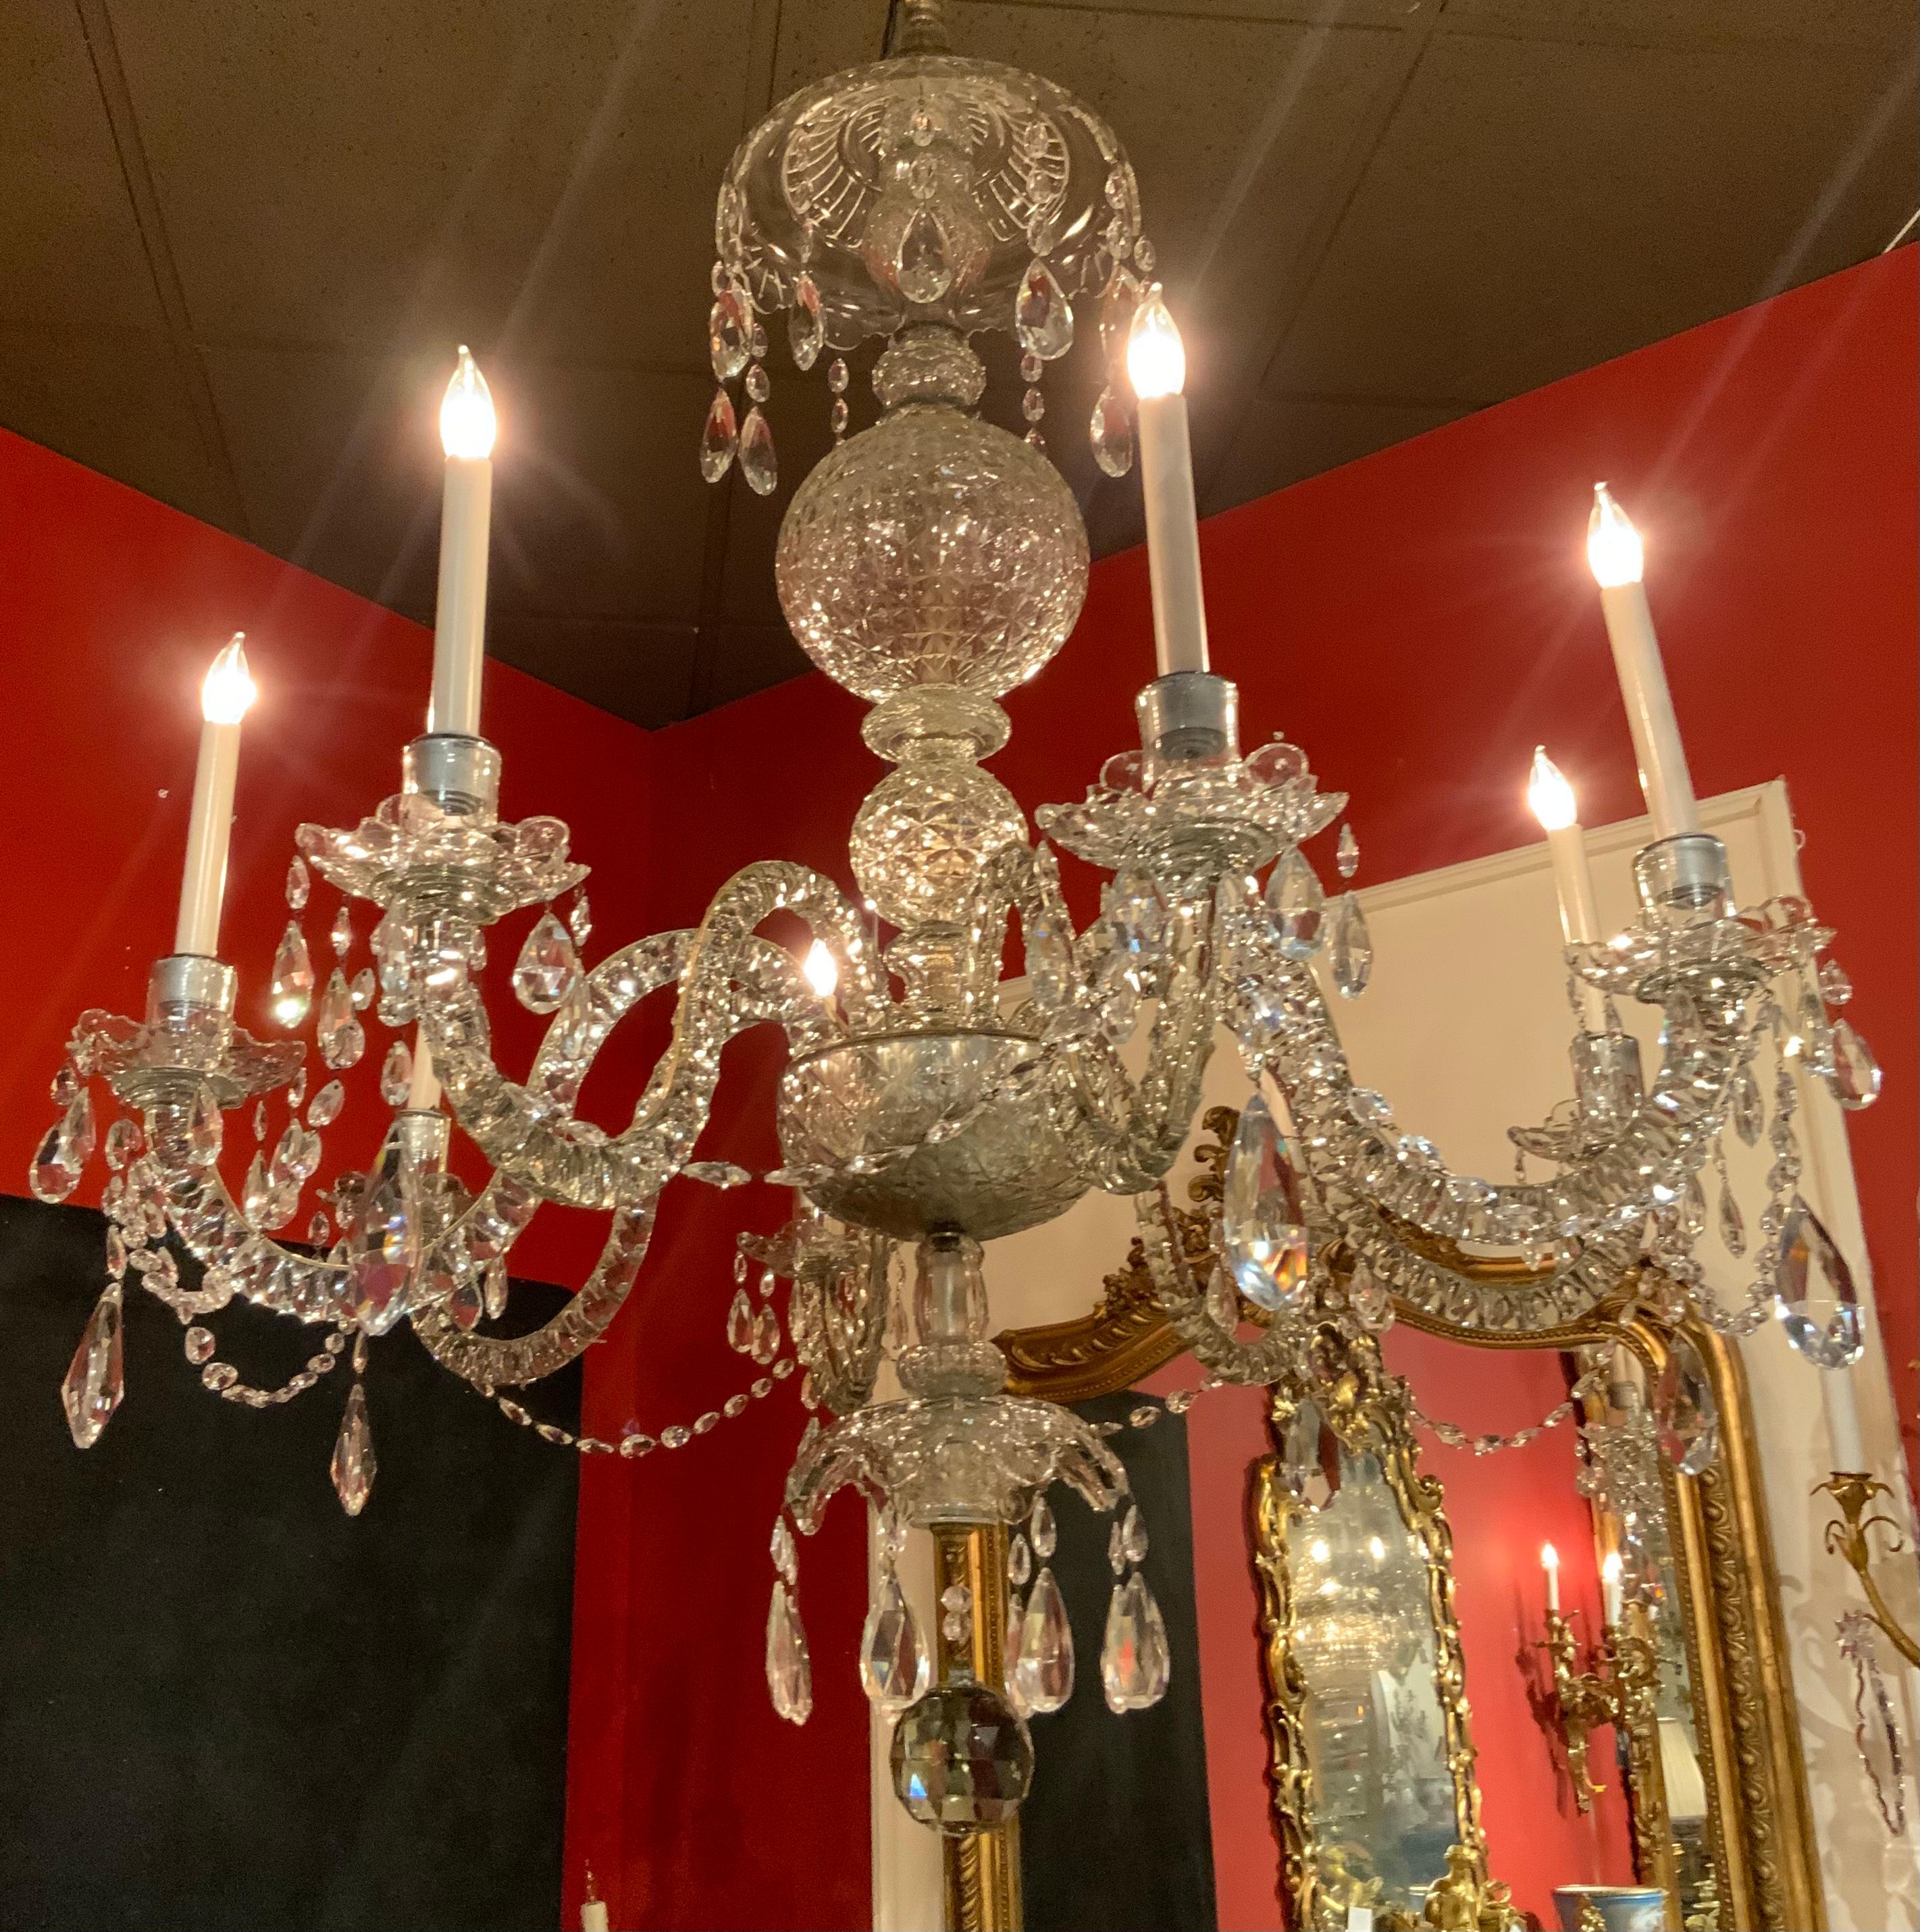 The exceptional quality of Waterford crystal is apparent in the
Quality of these chandeliers. They are large, each having eight 
Scrolling arms with cut crystal bobeches and each ending
in crystal pendants. The central post is made of the